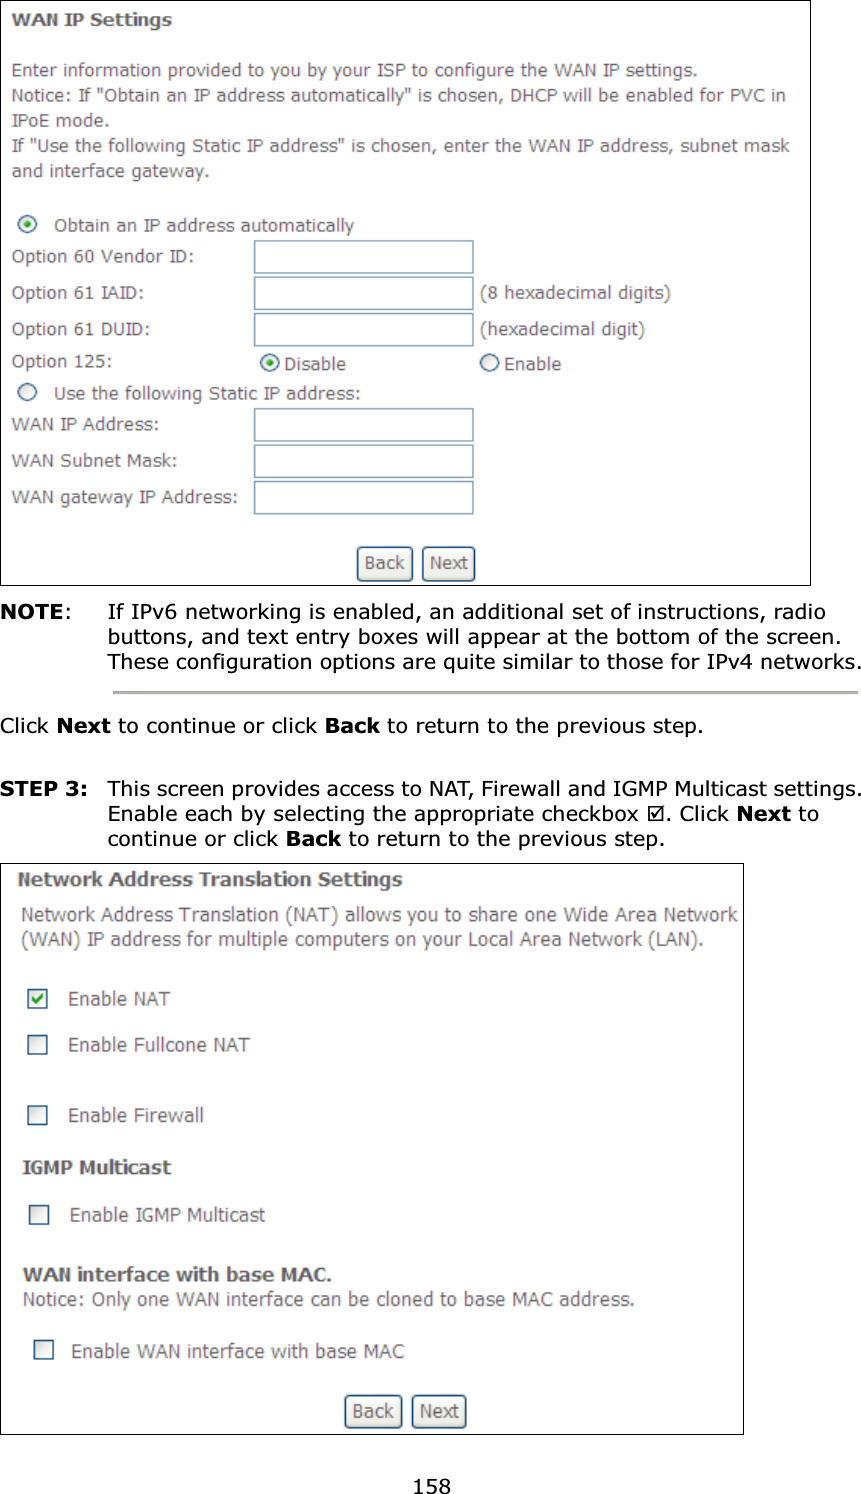 158NOTE: If IPv6 networking is enabled, an additional set of instructions, radio buttons, and text entry boxes will appear at the bottom of the screen.These configuration options are quite similar to those for IPv4 networks.Click Next to continue or click Back to return to the previous step.STEP 3: This screen provides access to NAT, Firewall and IGMP Multicast settings. Enable each by selecting the appropriate checkbox ;. Click Next to continue or click Back to return to the previous step.